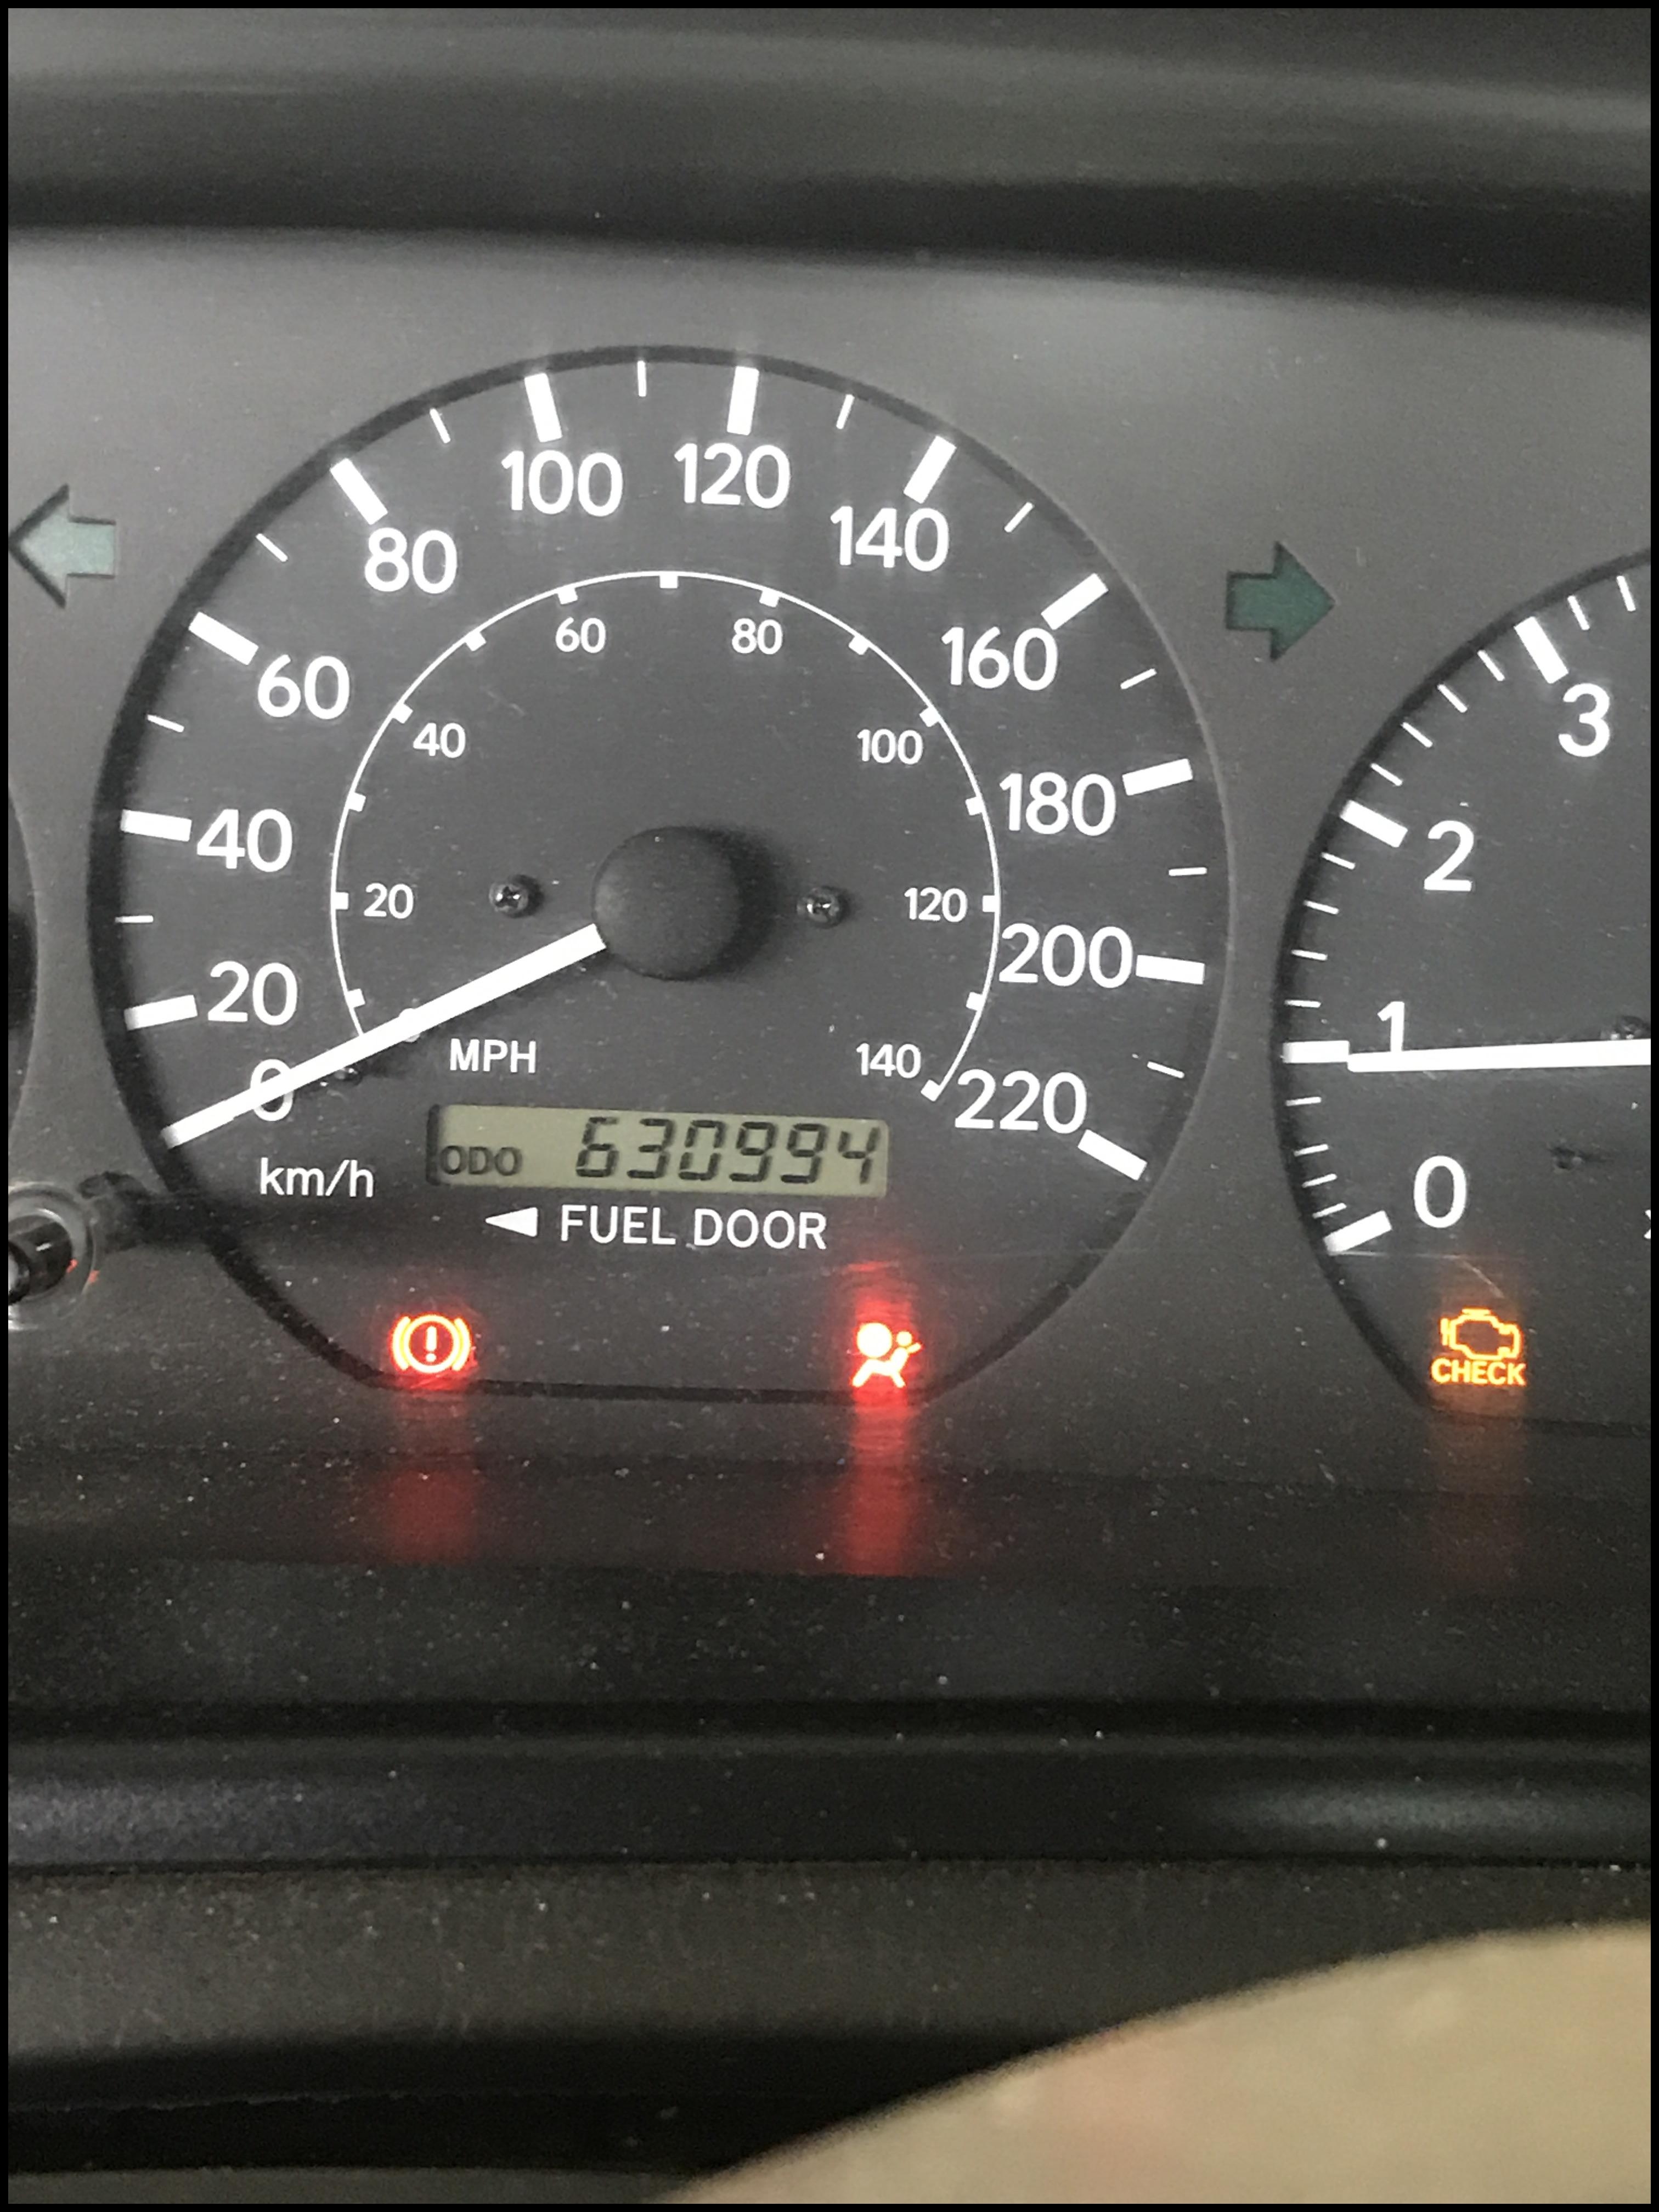 Heard you guys like high mileage 630 000km on a 2000 Toyota Camry As a 1st year Apprentice I was pretty amazed